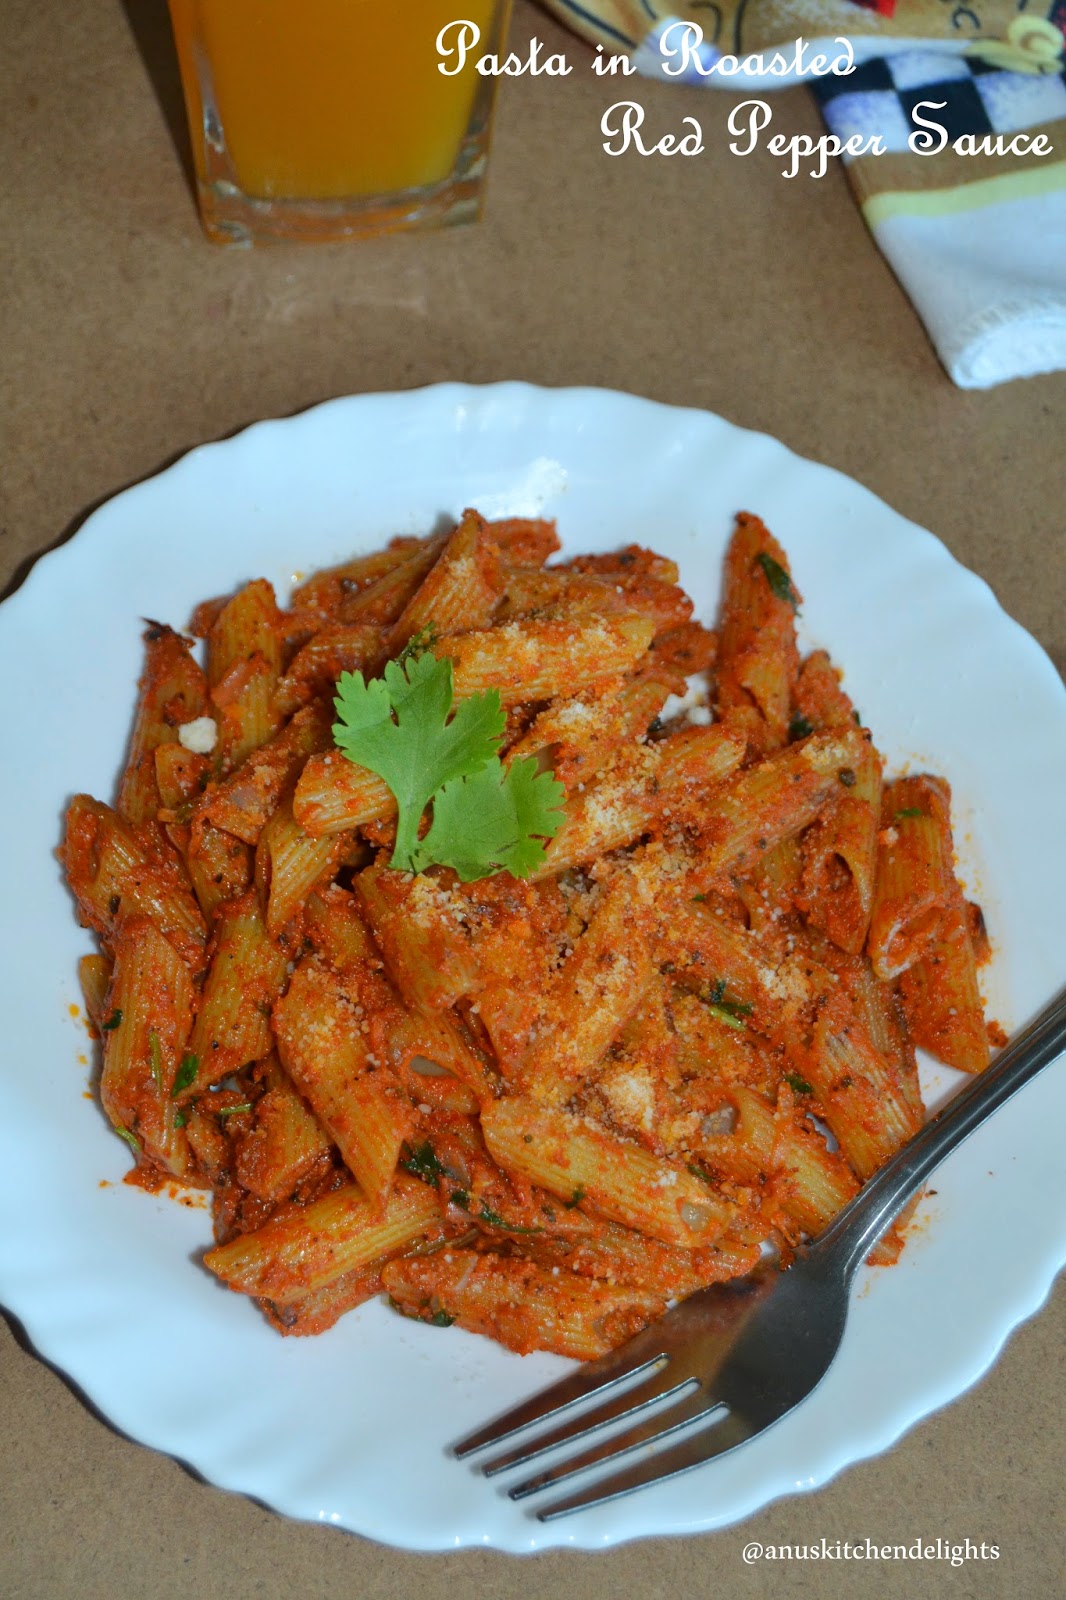 Pasta in roasted red pepper sauce